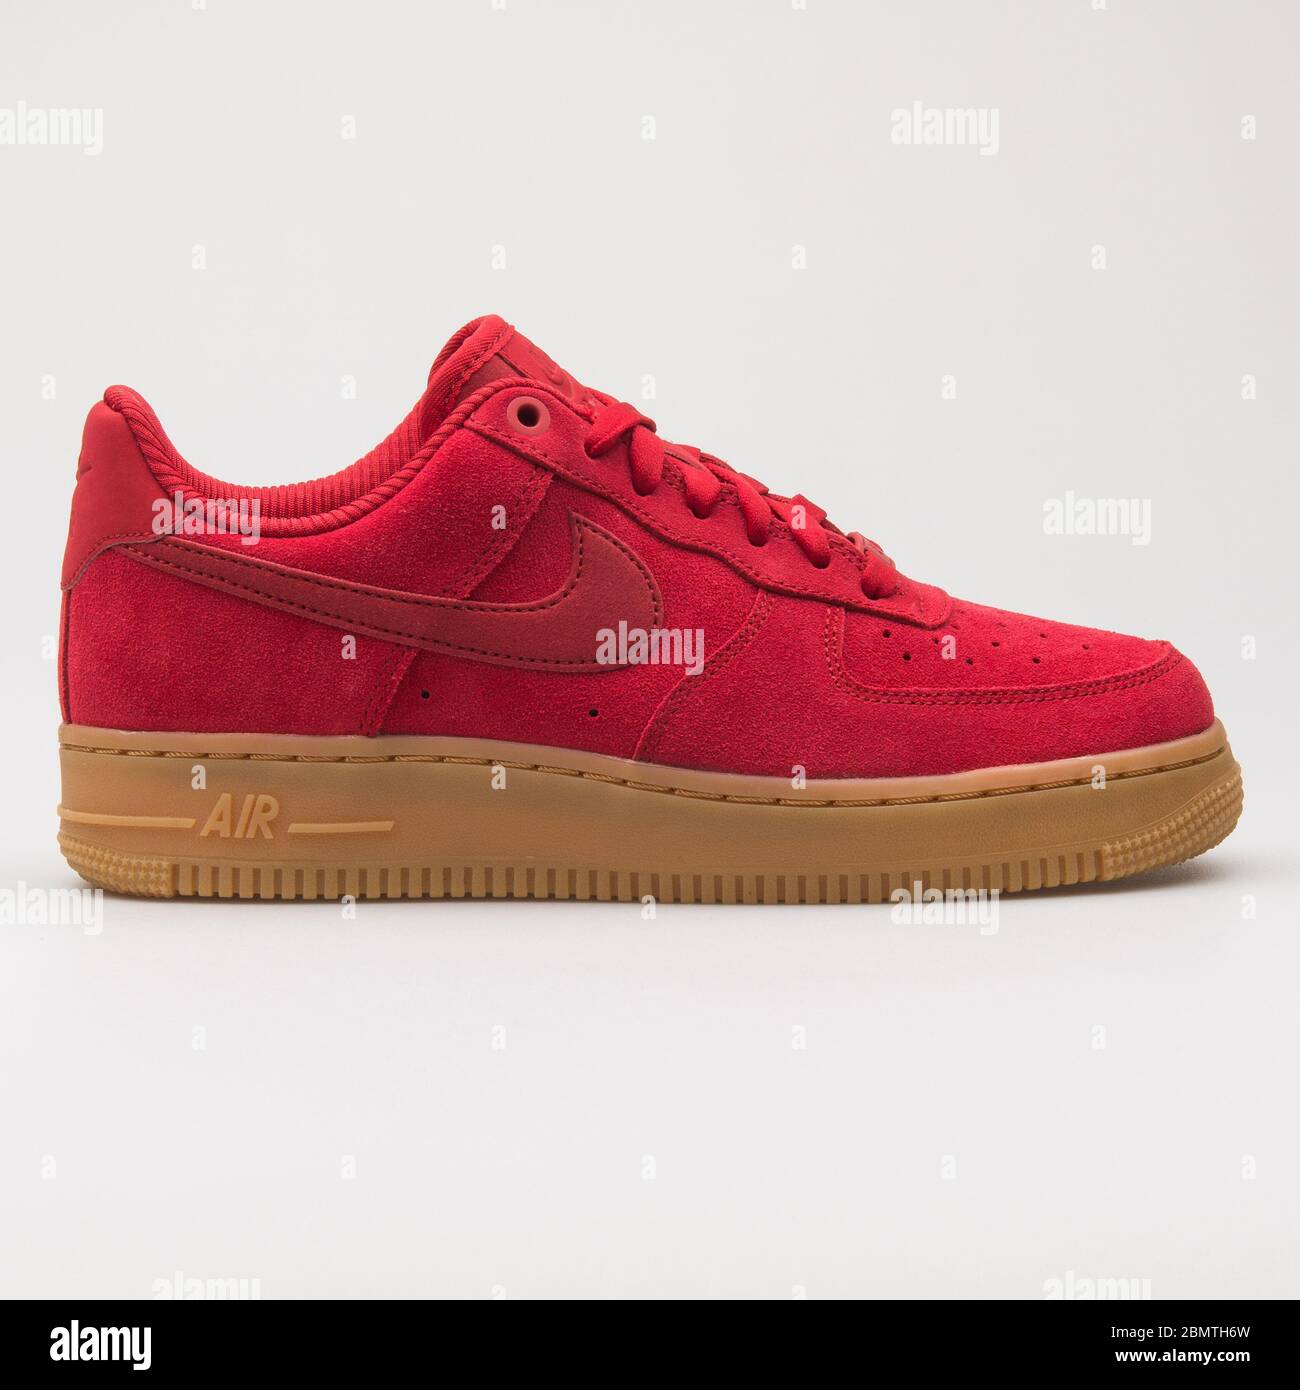 VIENNA, AUSTRIA - JANUARY 12, 2018: Nike Air Force 1 07 Suede red and brown  sneaker on white background Stock Photo - Alamy